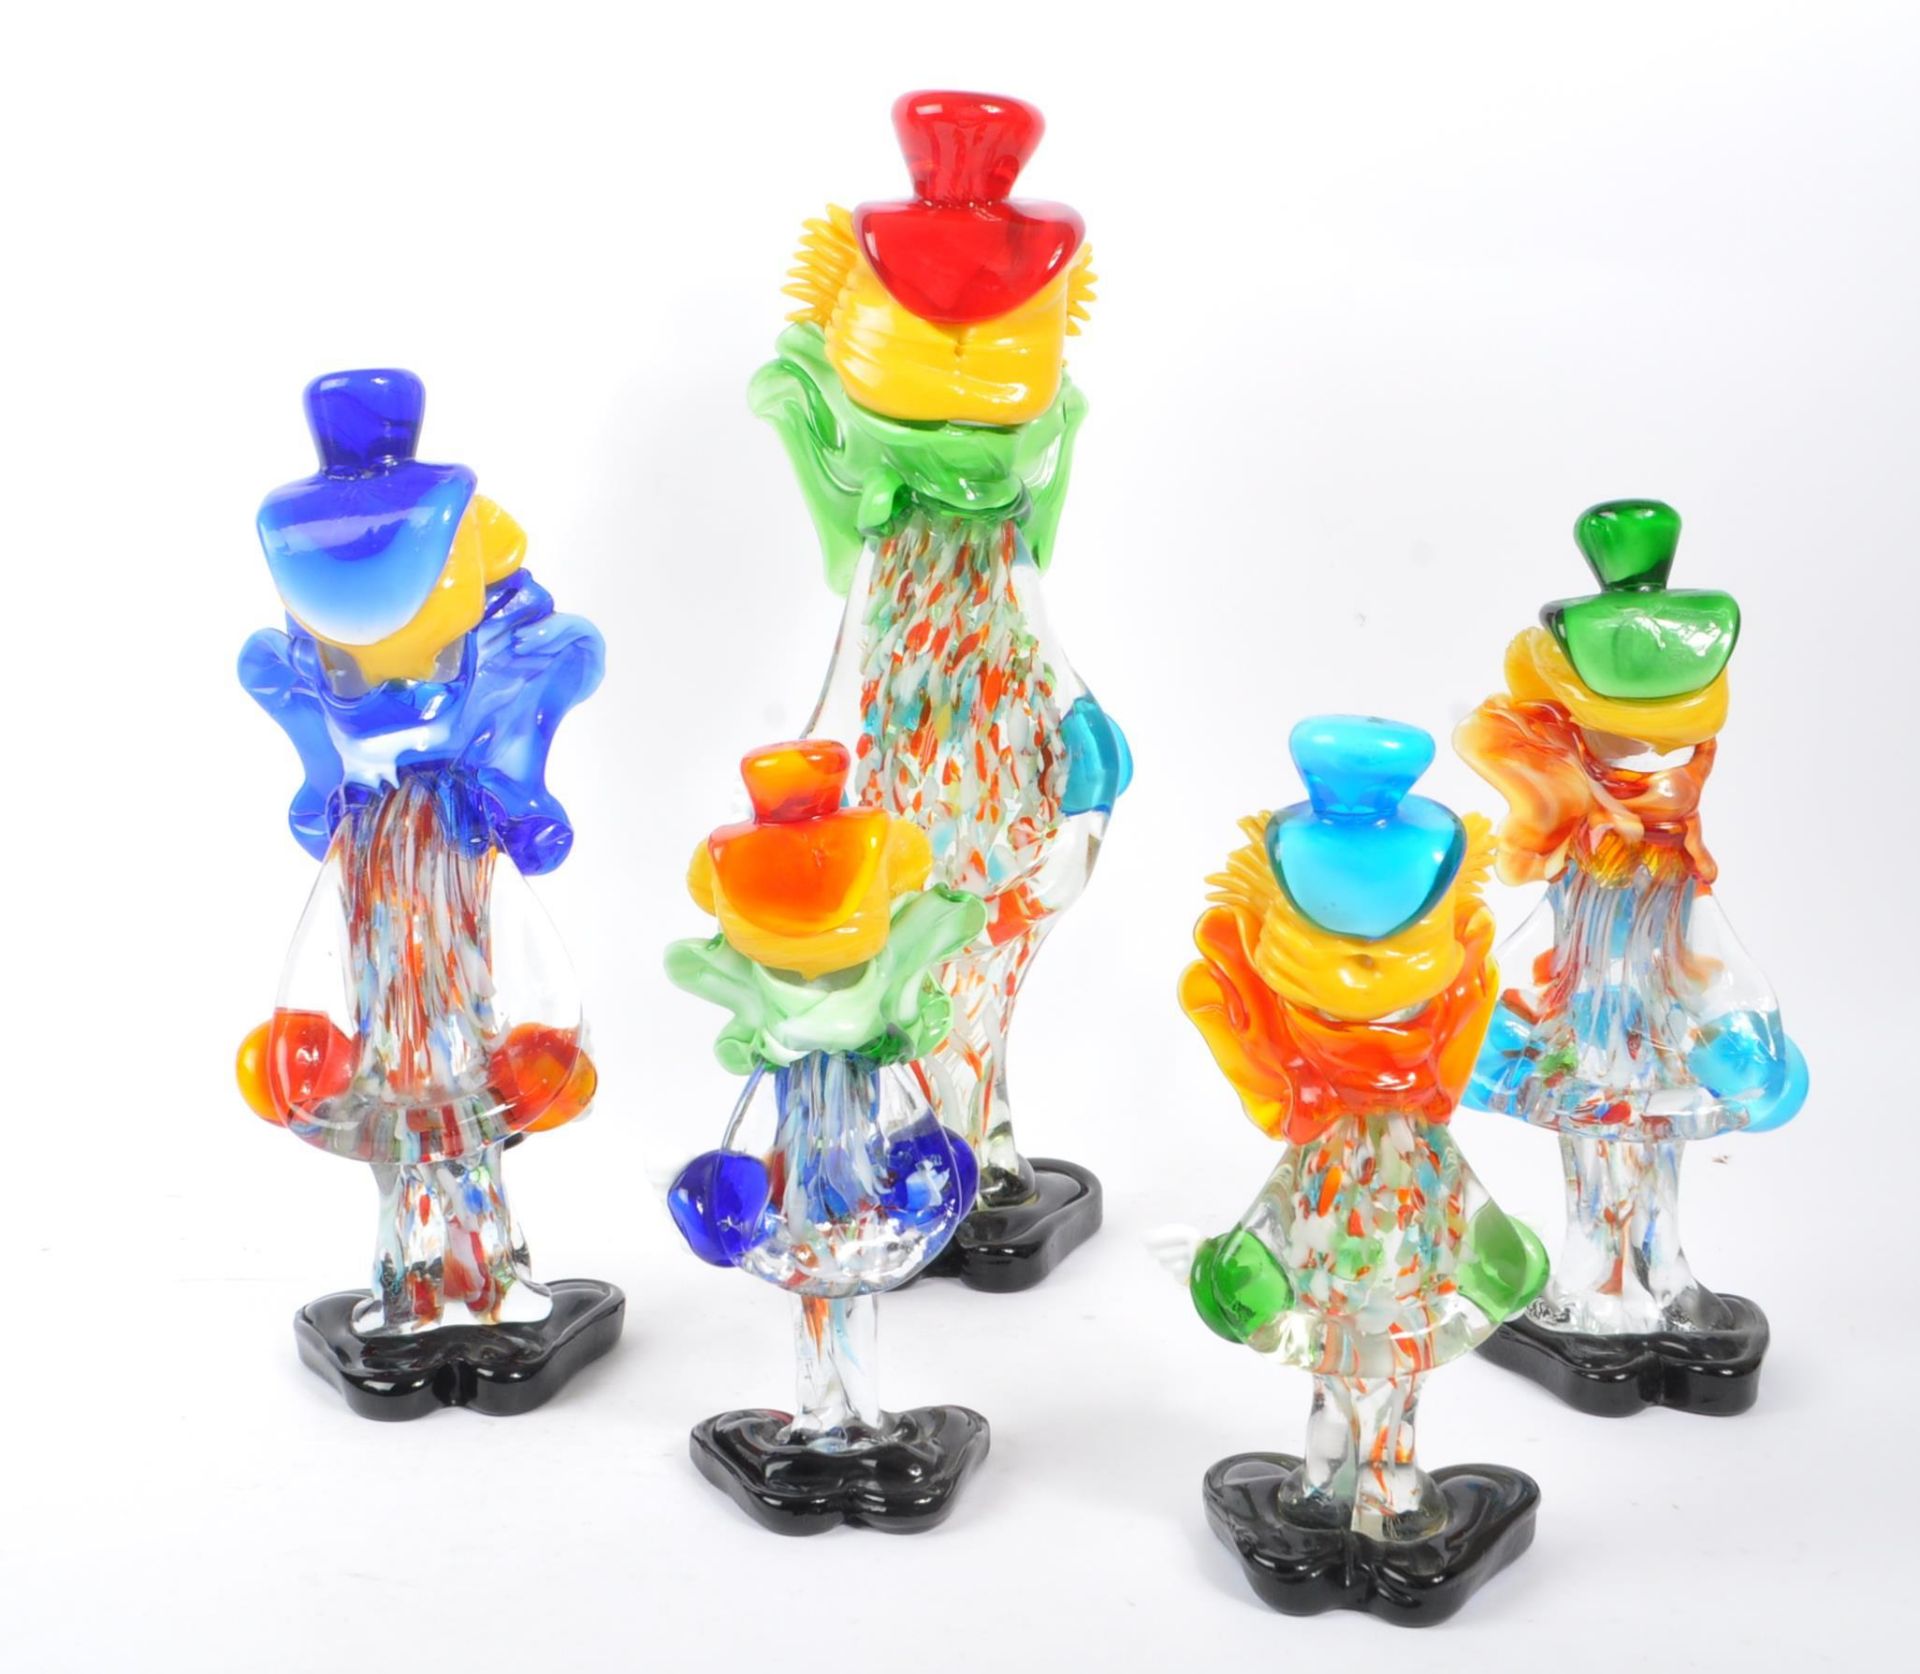 COLLECTION OF FIVE STUDIO GLASS MURANO CLOWNS - Image 6 of 7